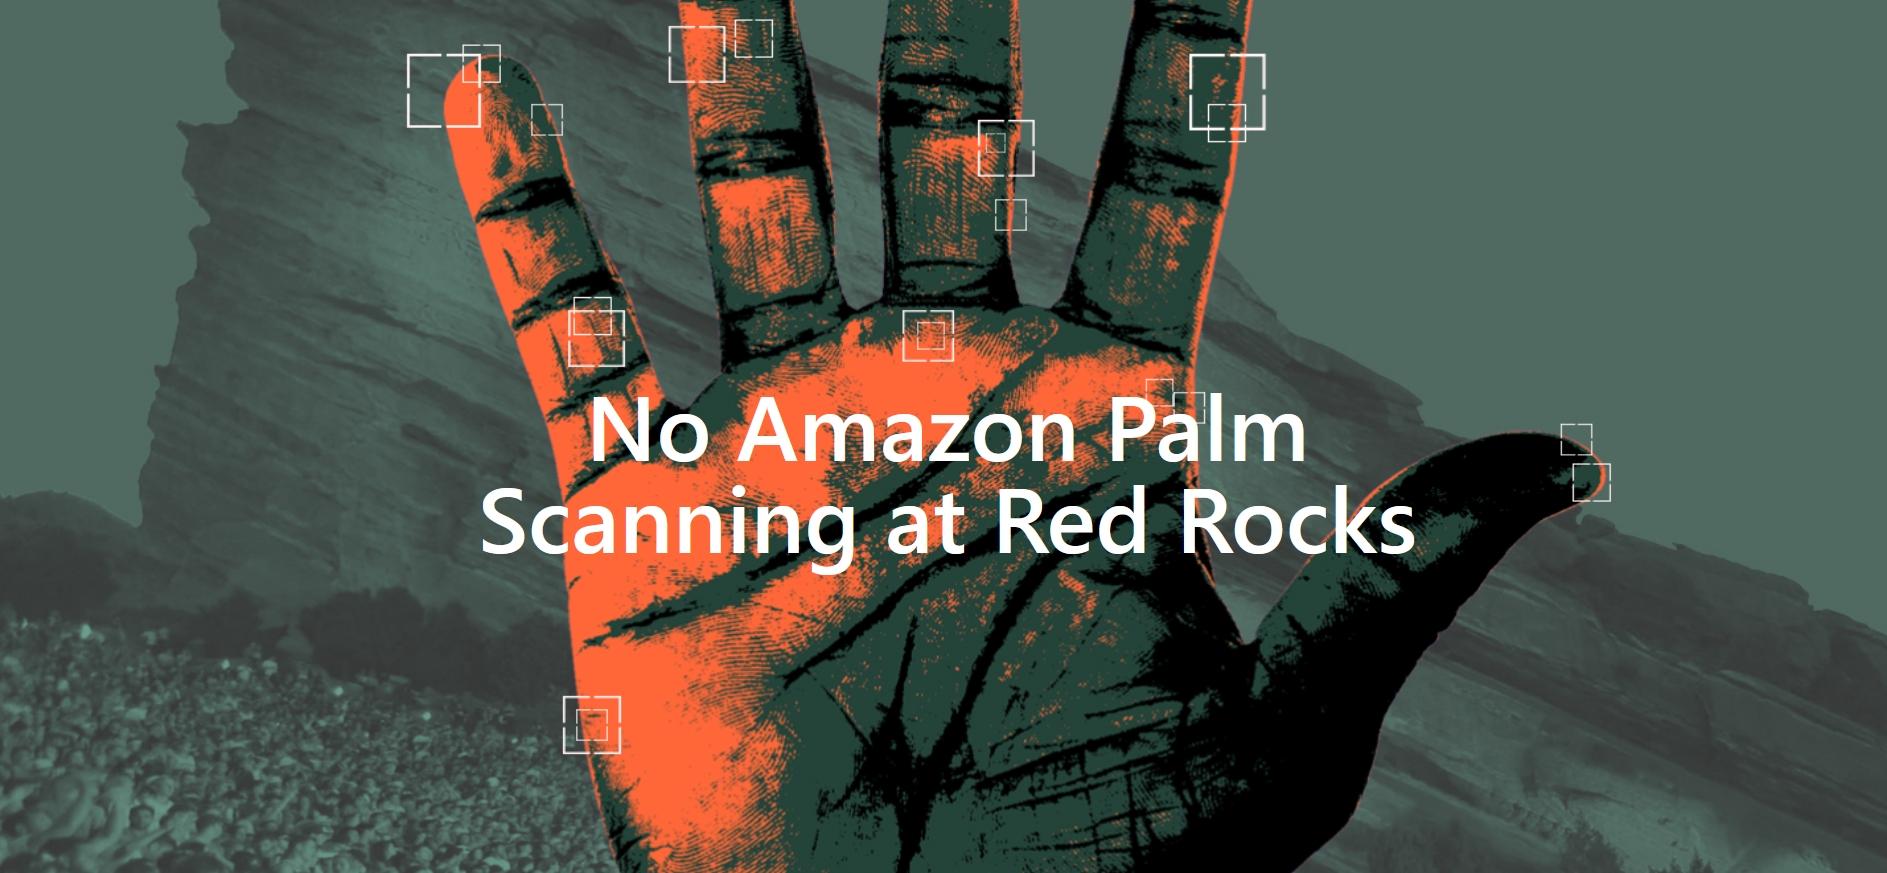 Amazon One does not rock